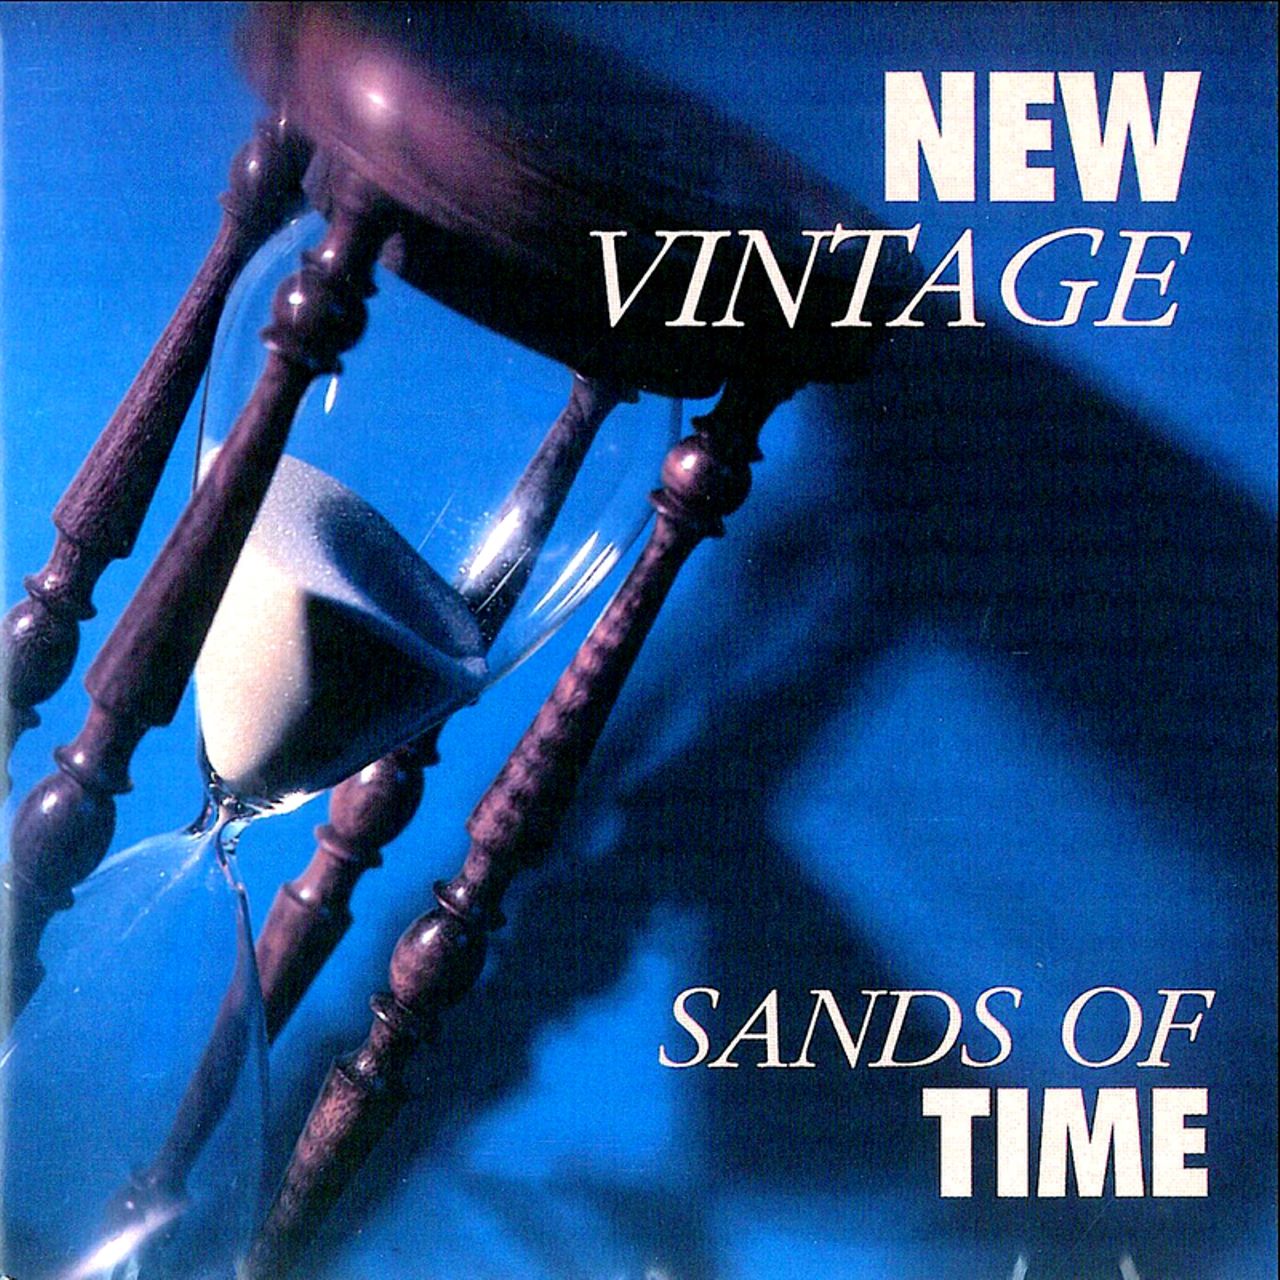 New Vintage - Sands Of Time cover album